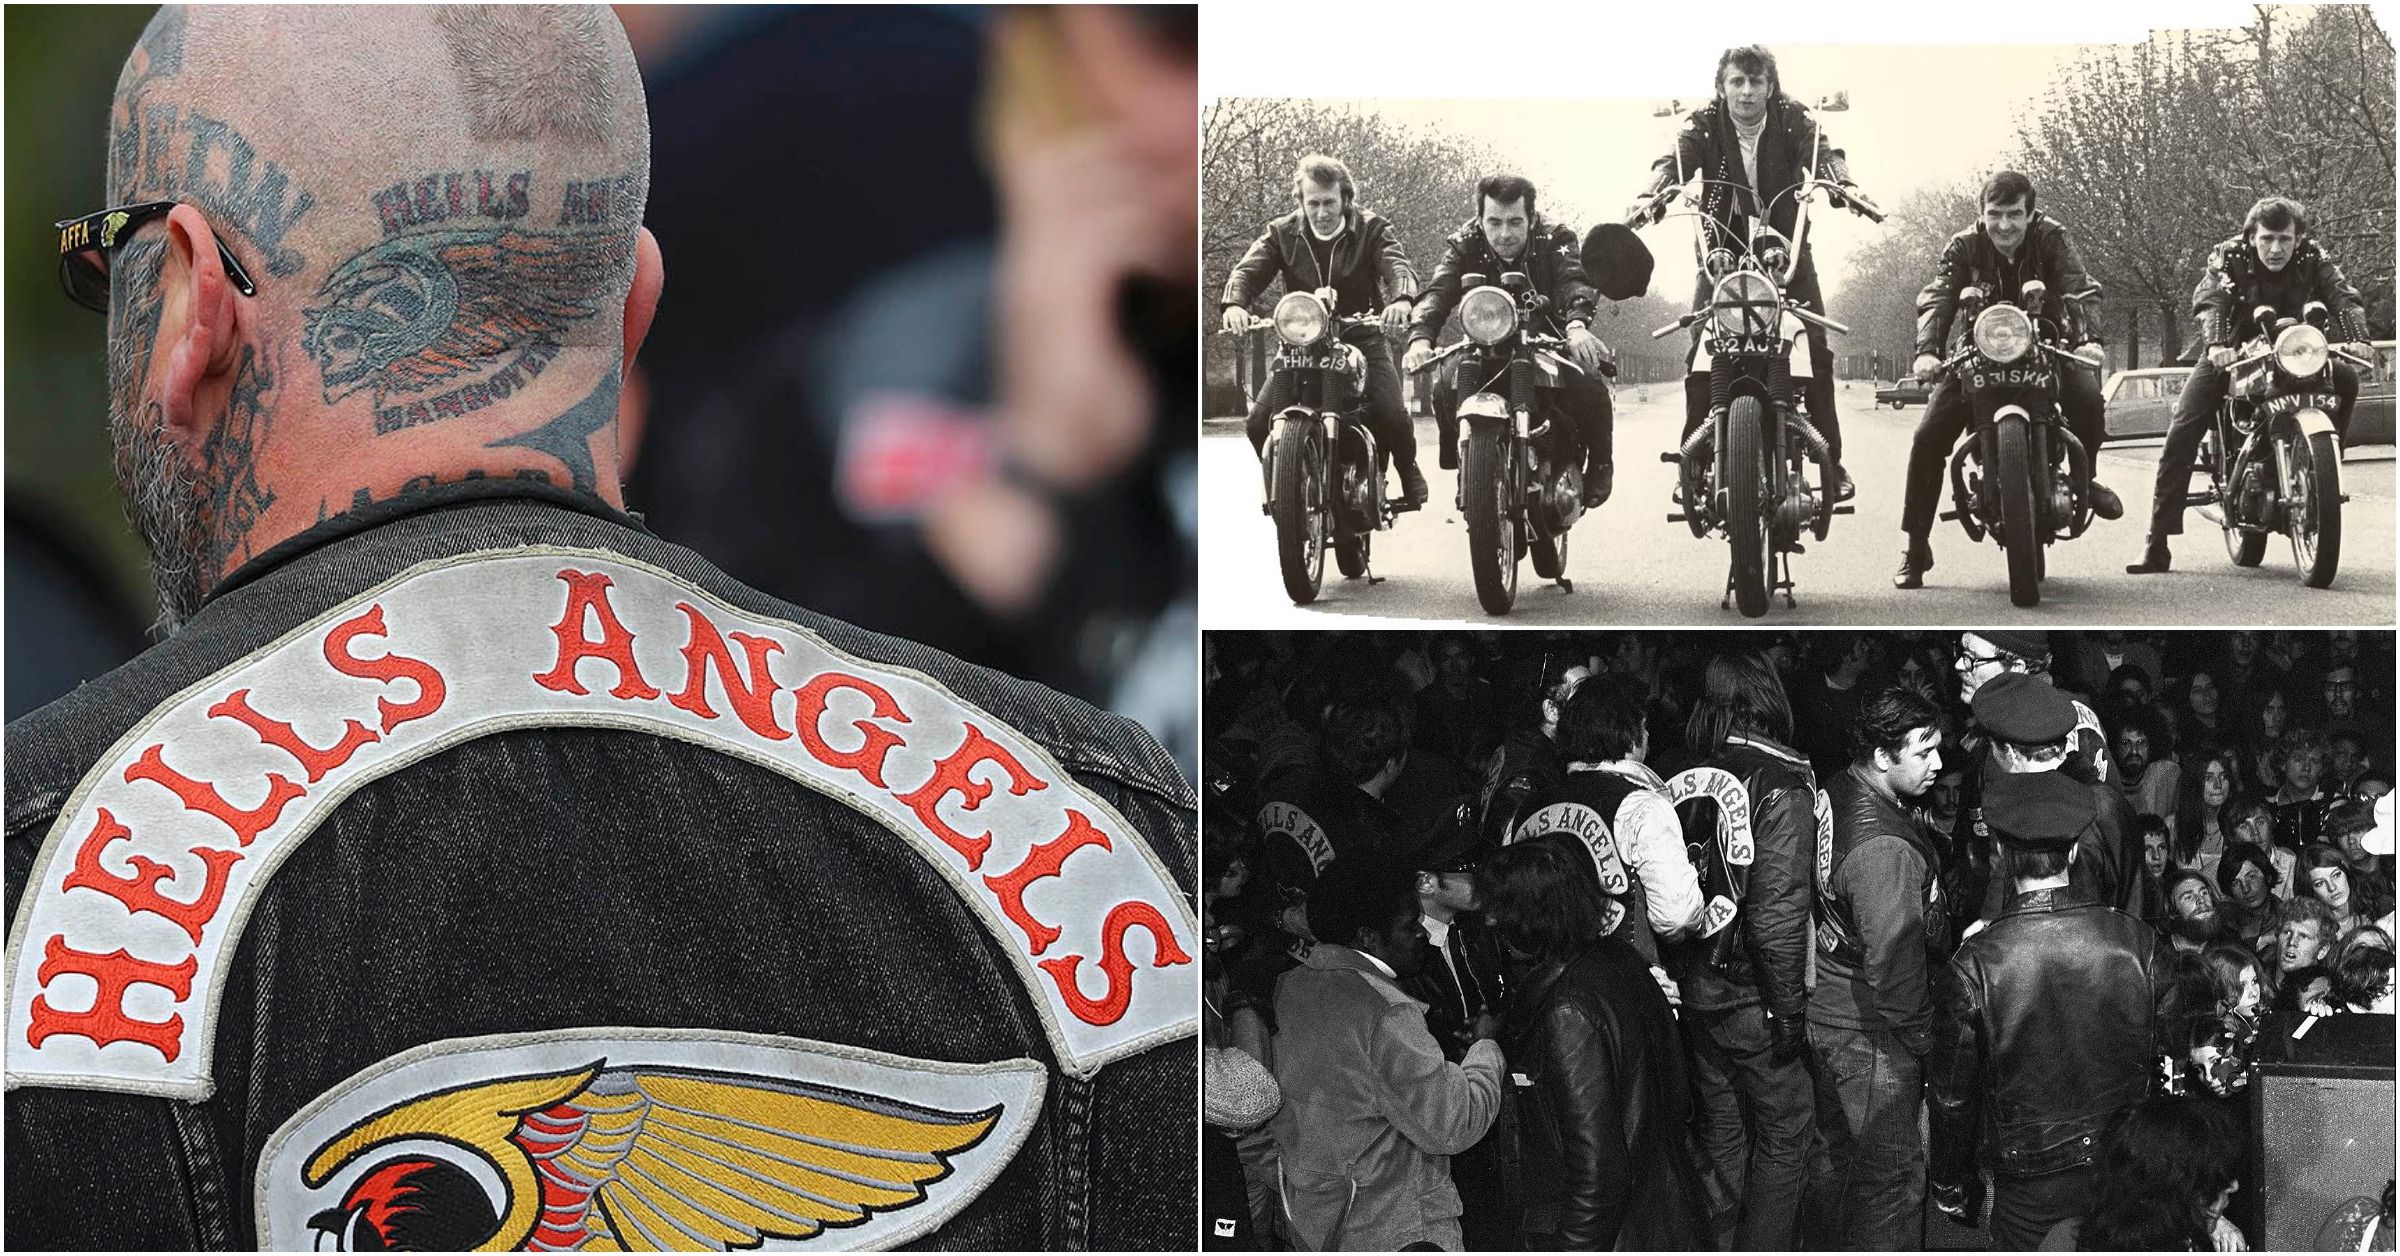 15 Flattering Facts About The Hells Angels Motorcycle Club.